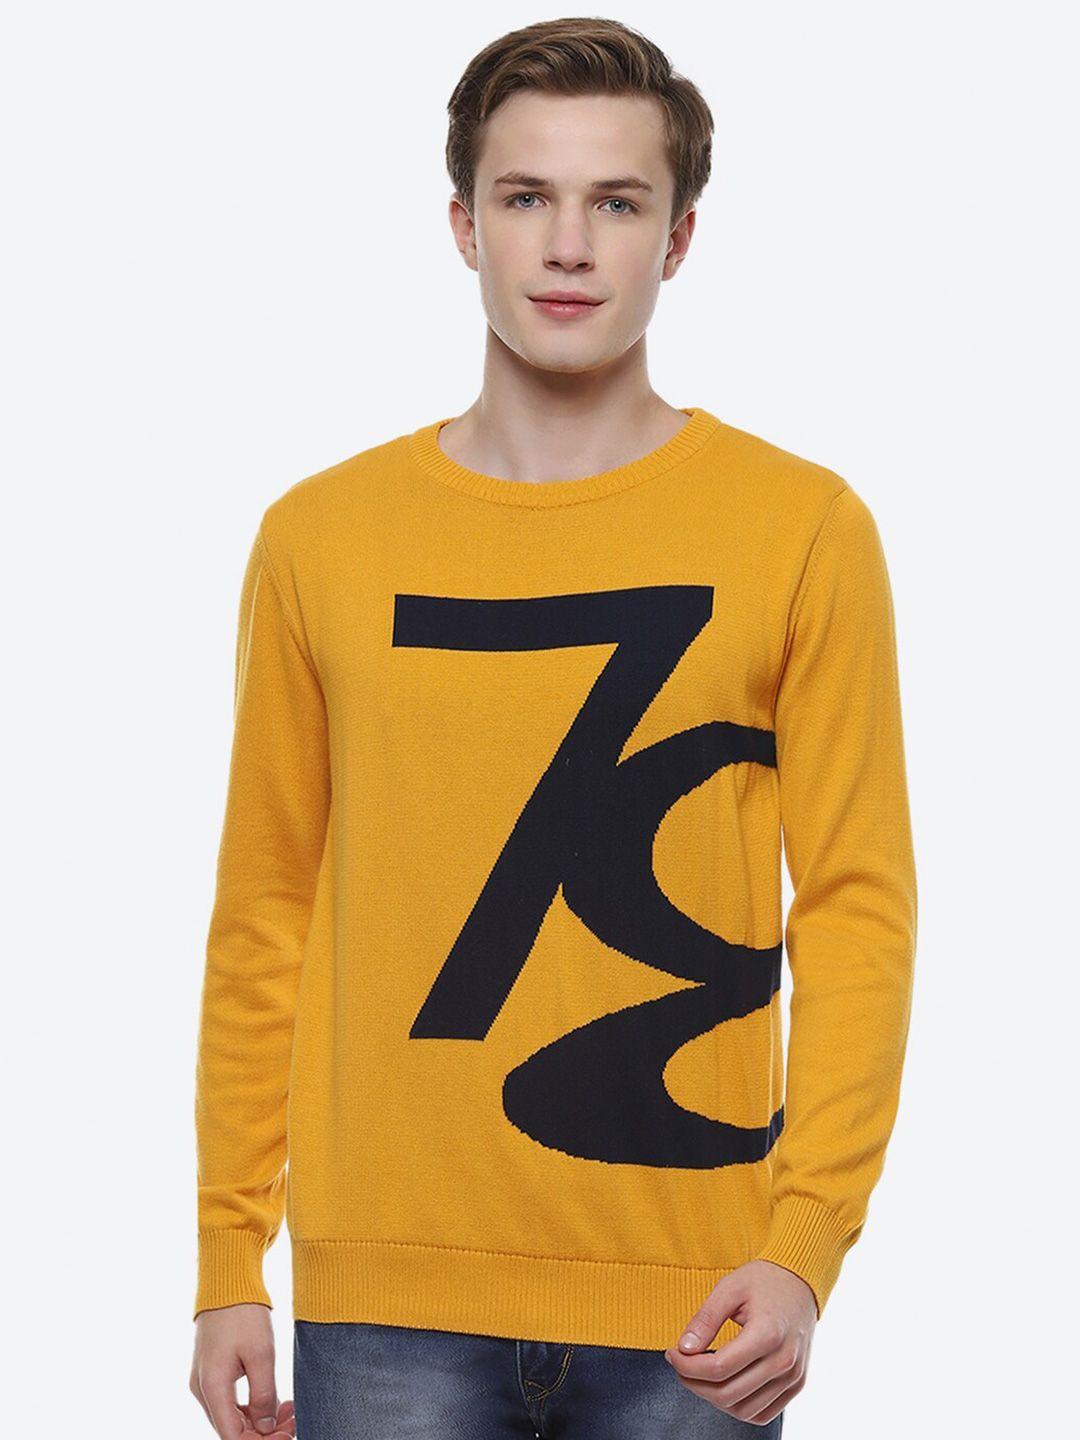 2bme typography printed pullover cotton sweaters